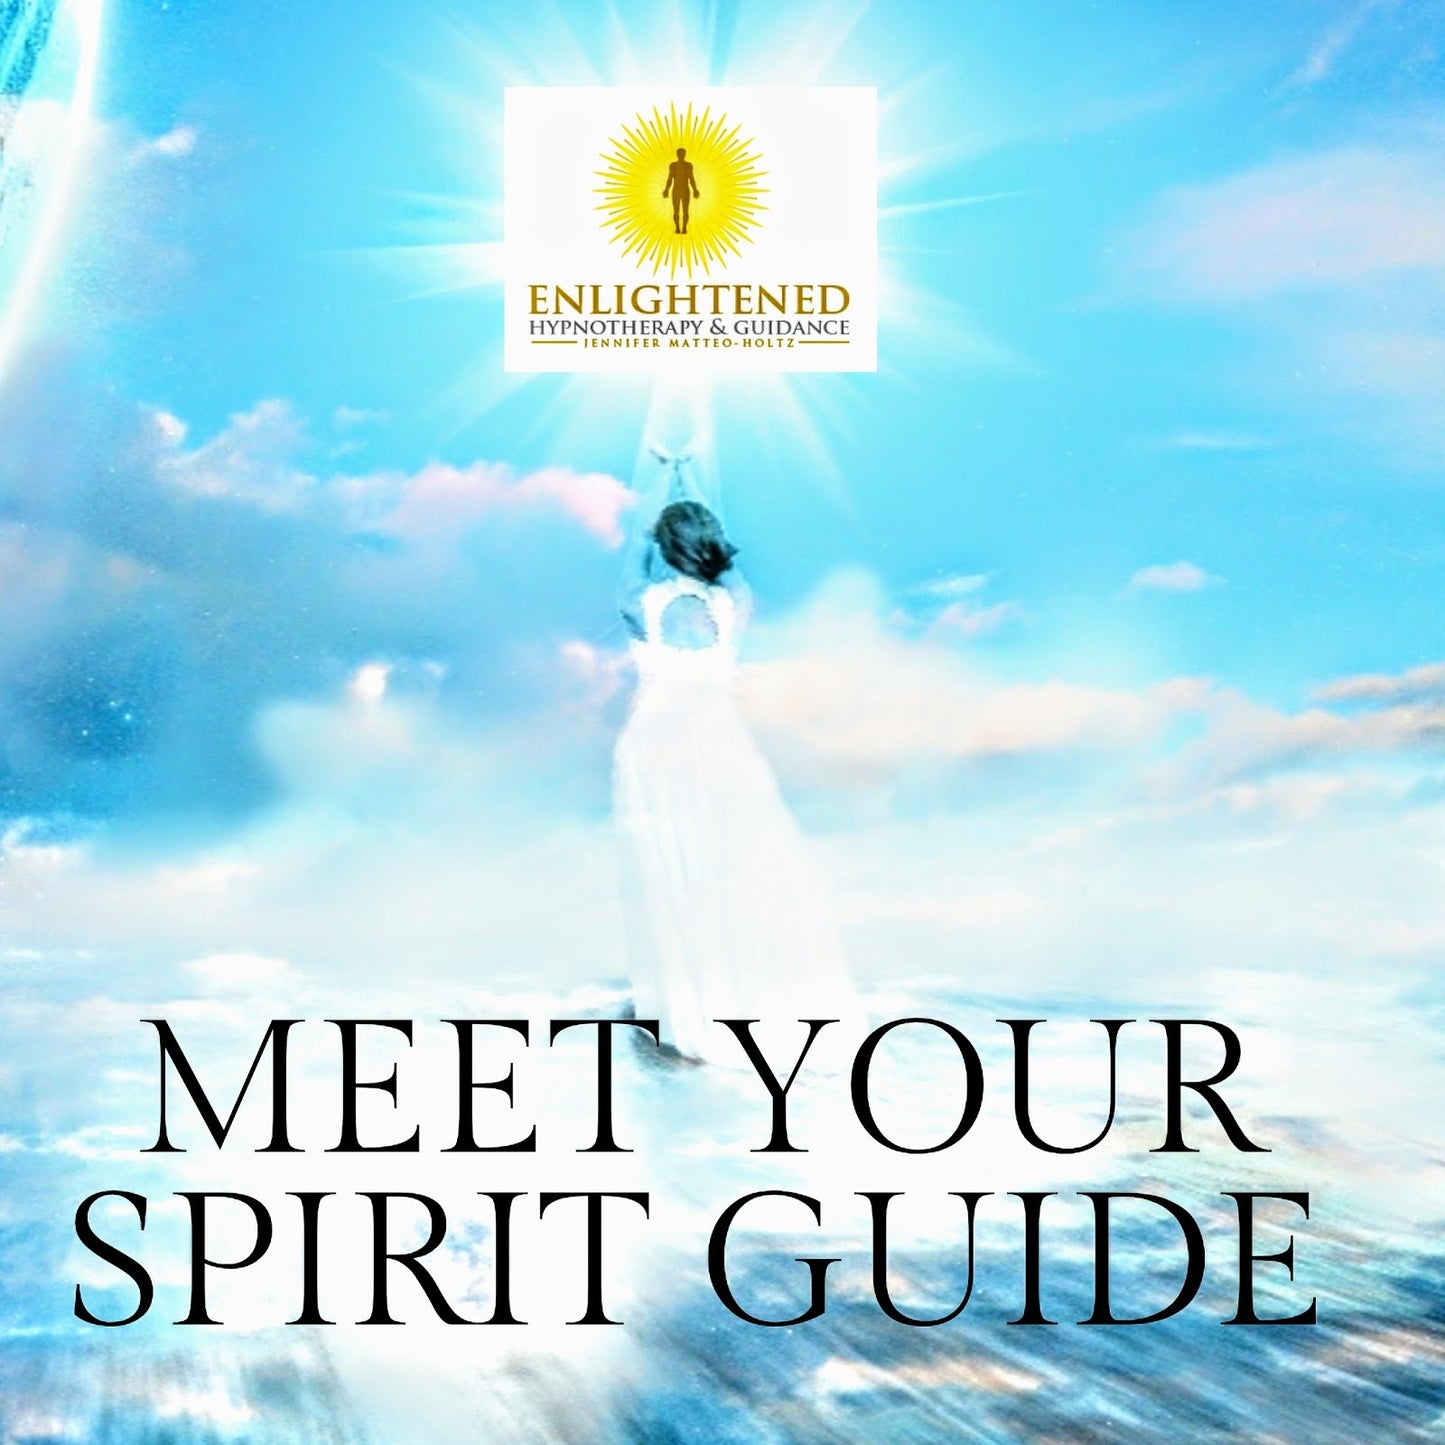 Meet Your Spirit Guides Hypnosis MP3